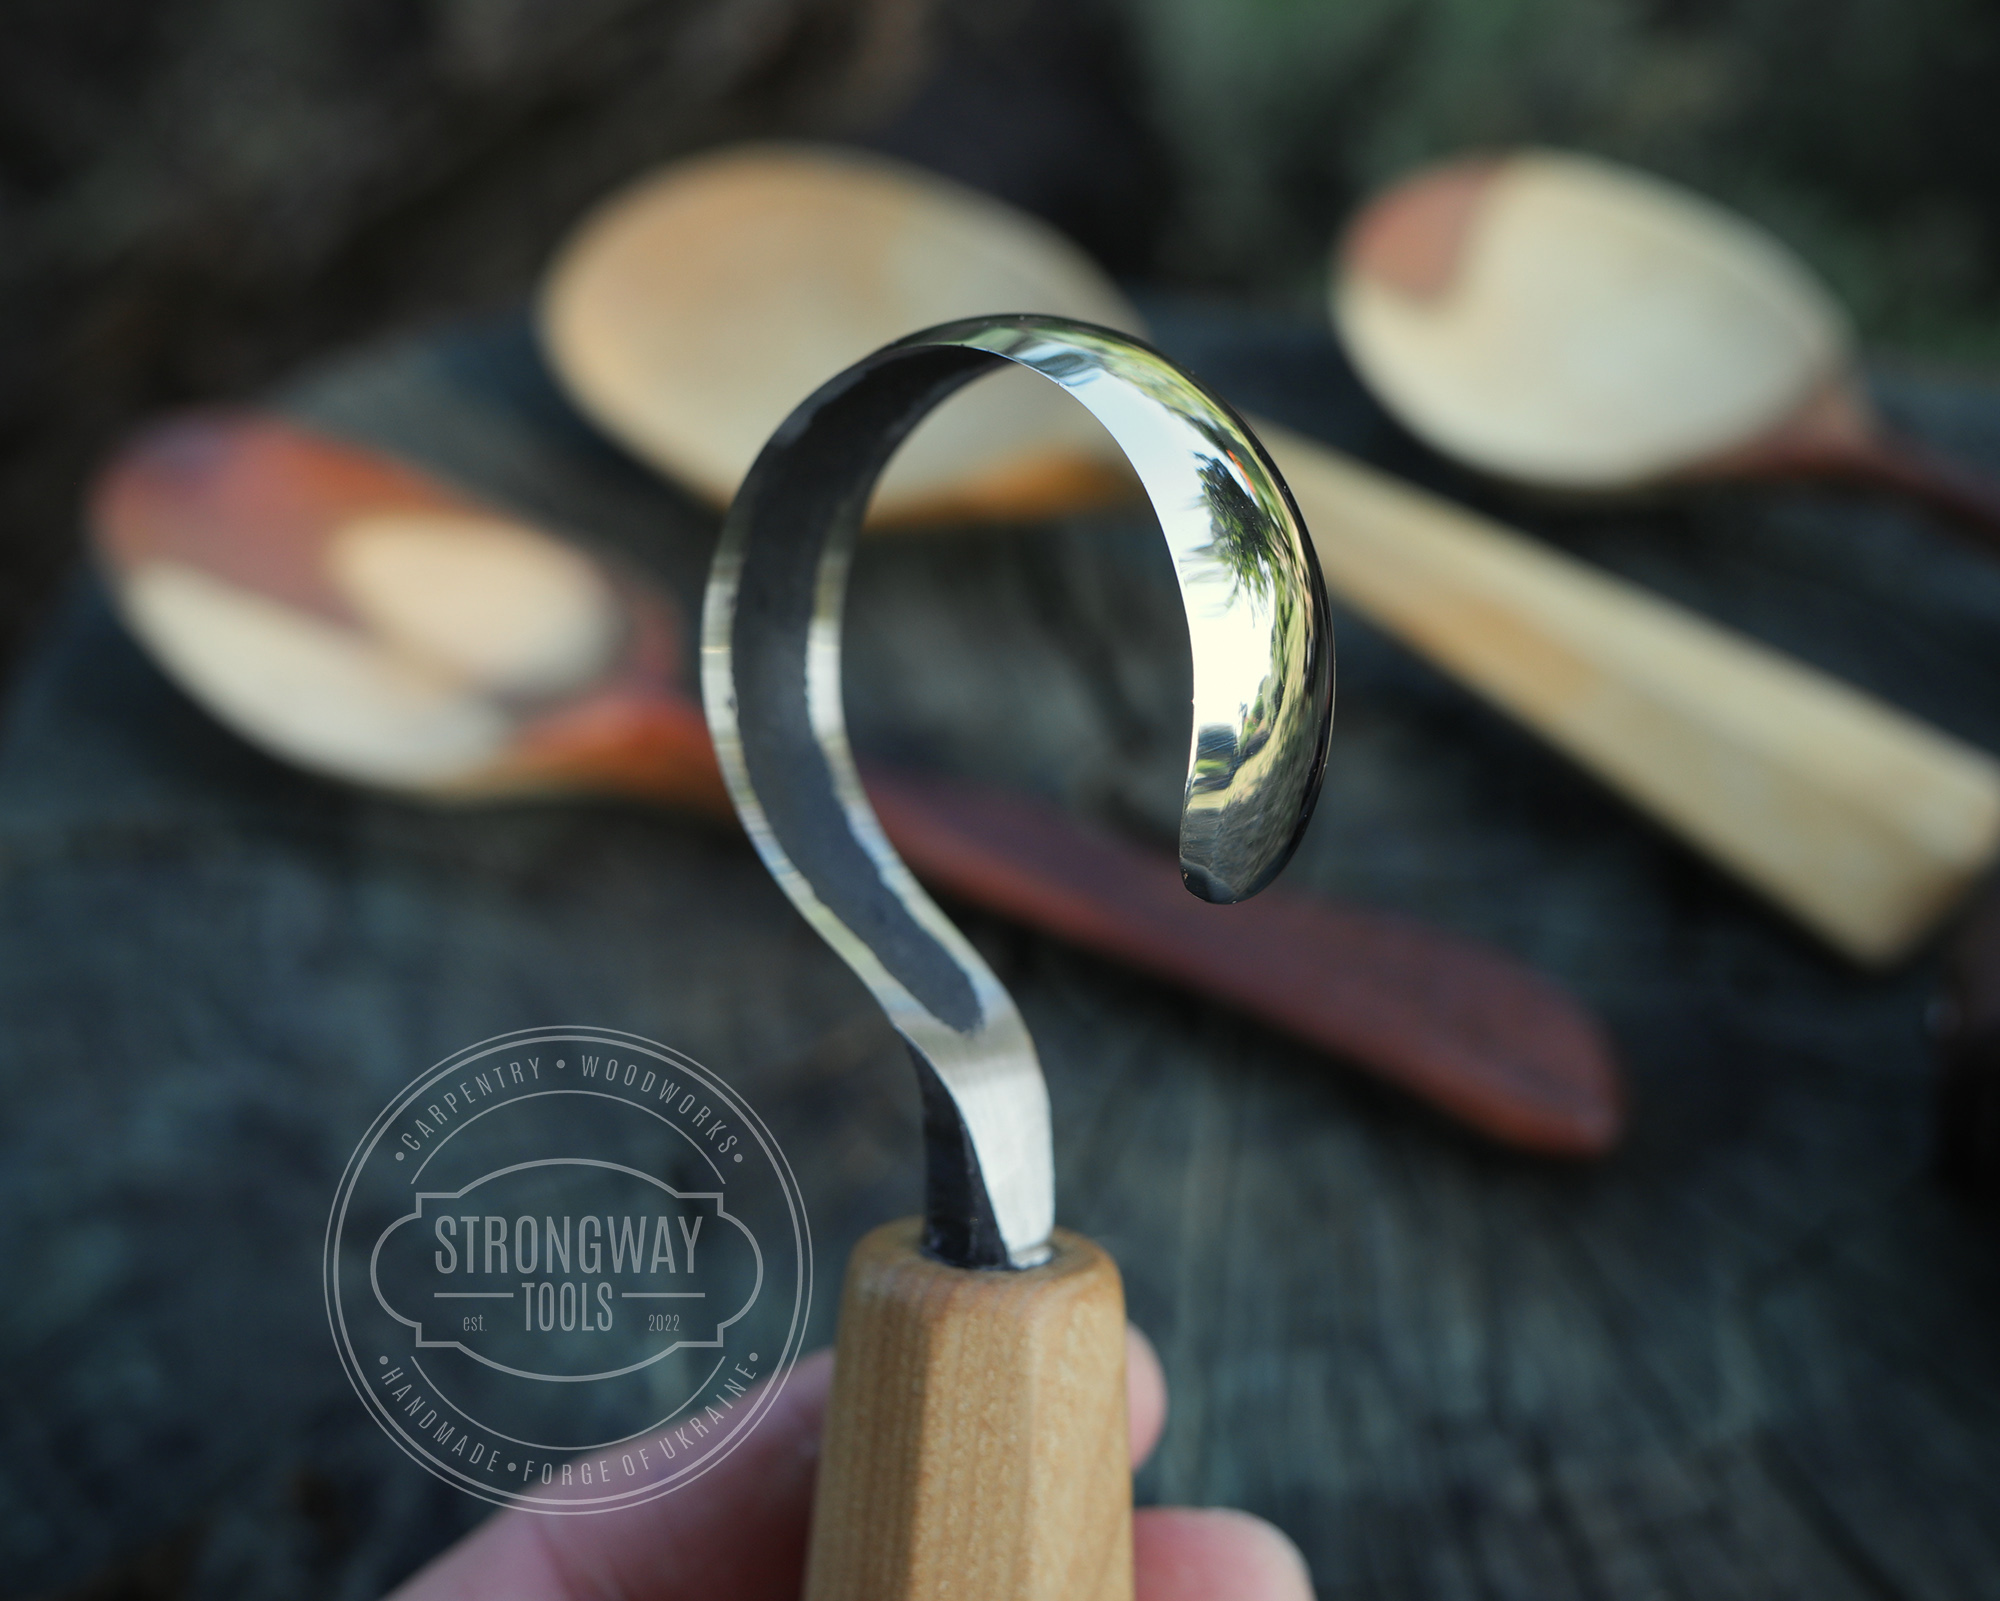 Spoon Carving Hook Knife with octagonal handle - The Spoon Crank